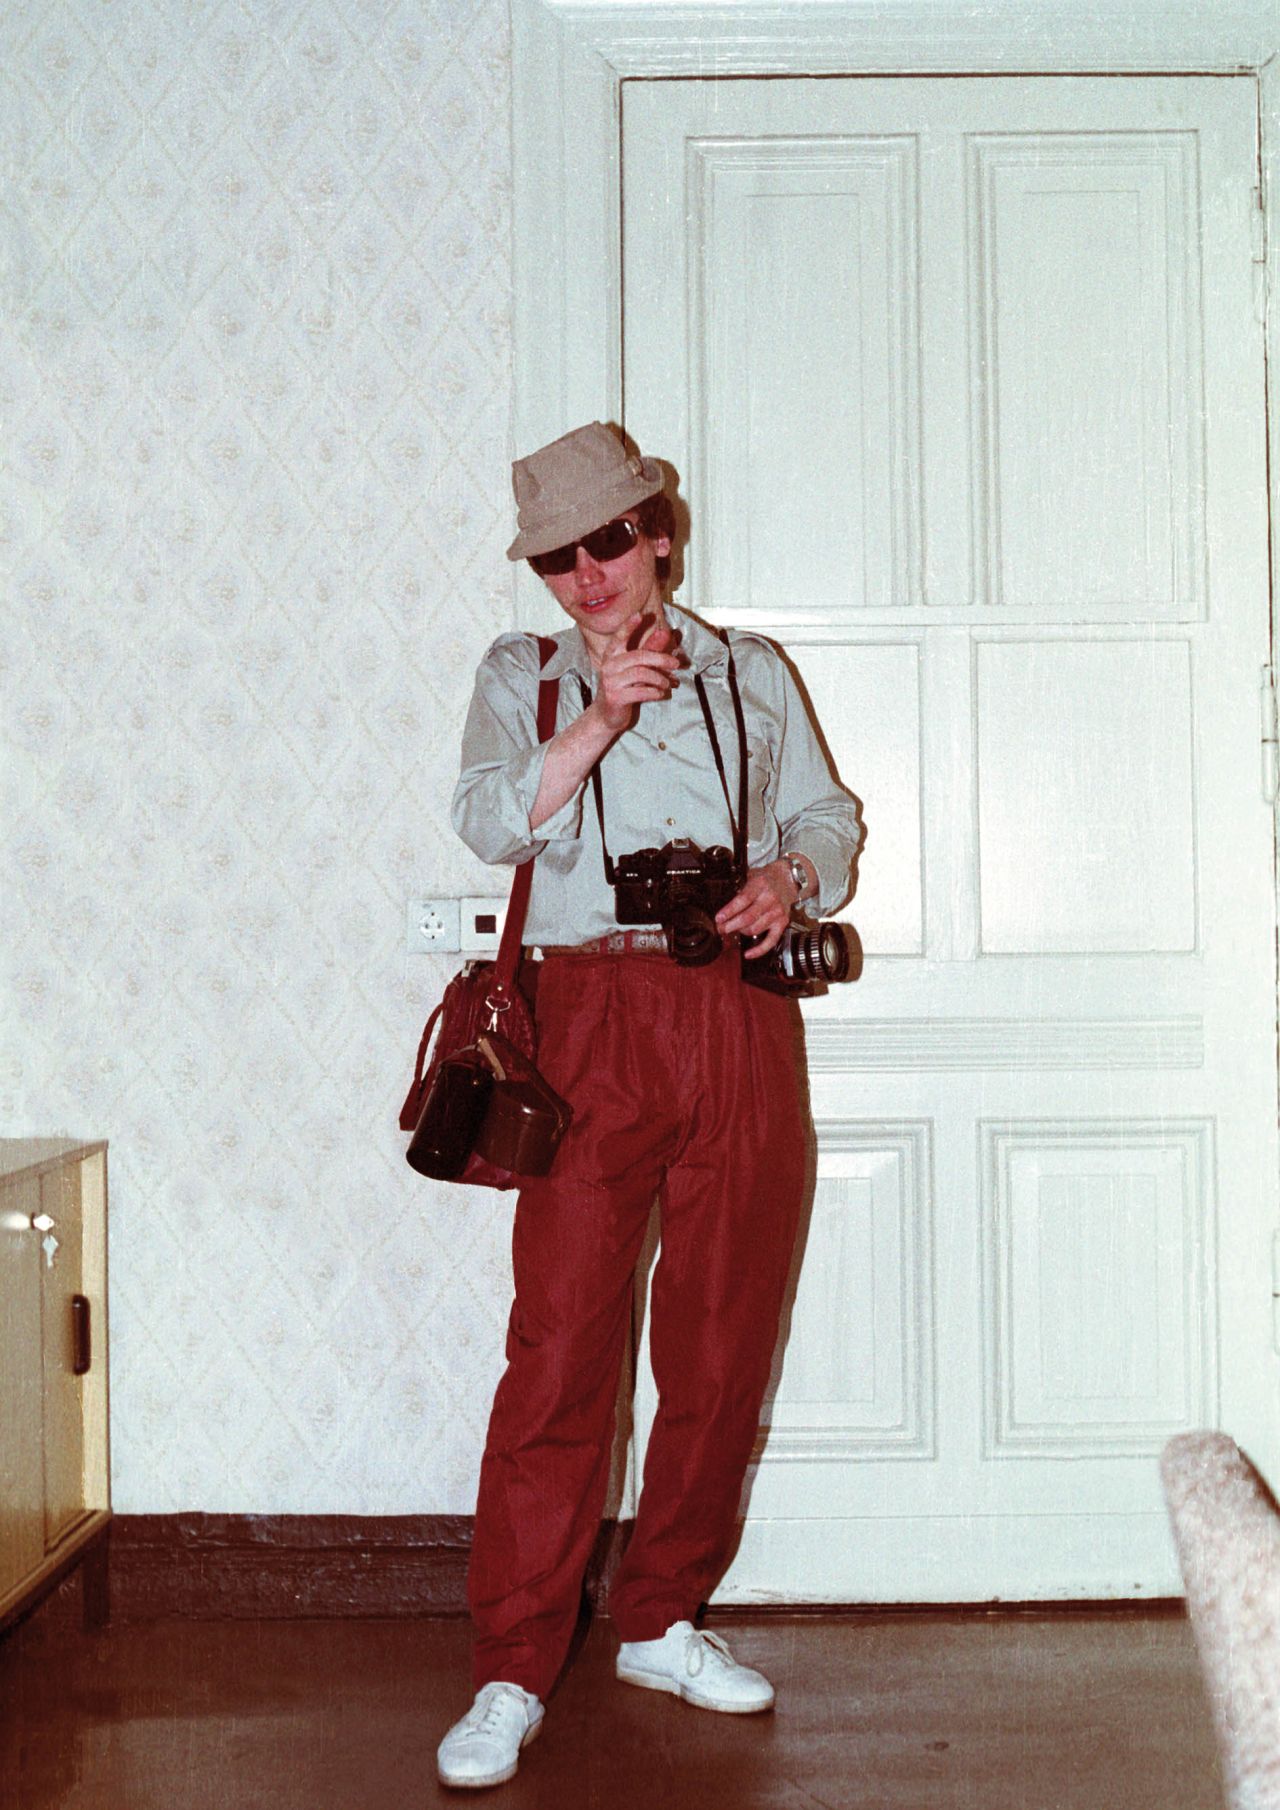 Disguises as tourists were often used to help agents appear "inconspicuous" in places frequented by Westerners. Props such as plastic shopping bags and cameras were often used.